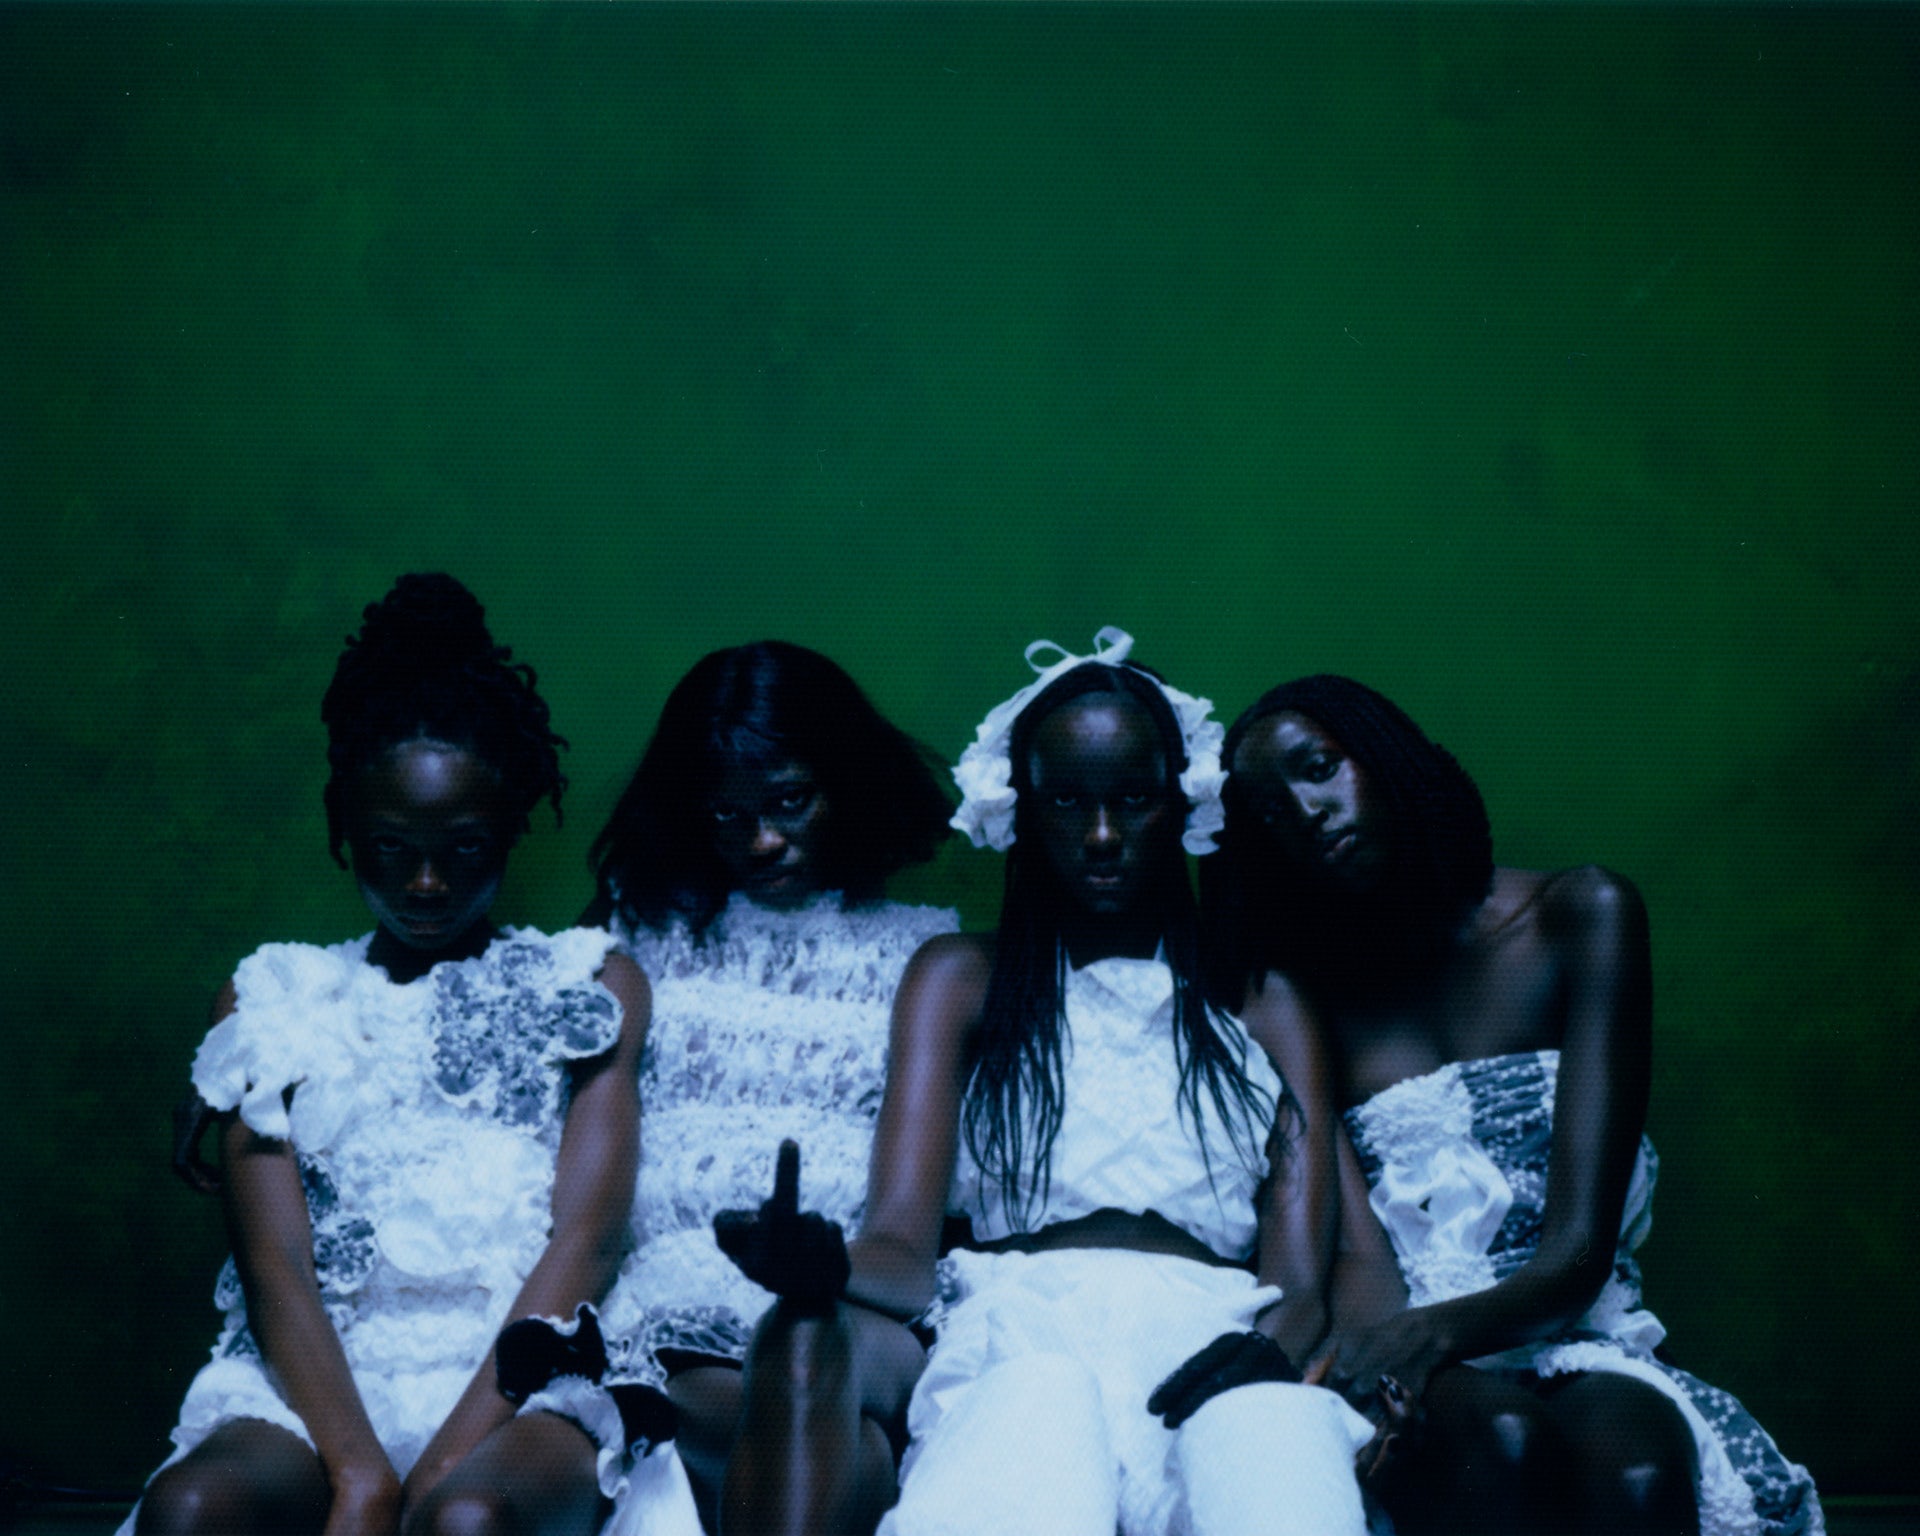 Photograph by Gabriel Moses showing four people leaning against a green backdrop wearing white outfits, with one person holding their middle finger up to the camera